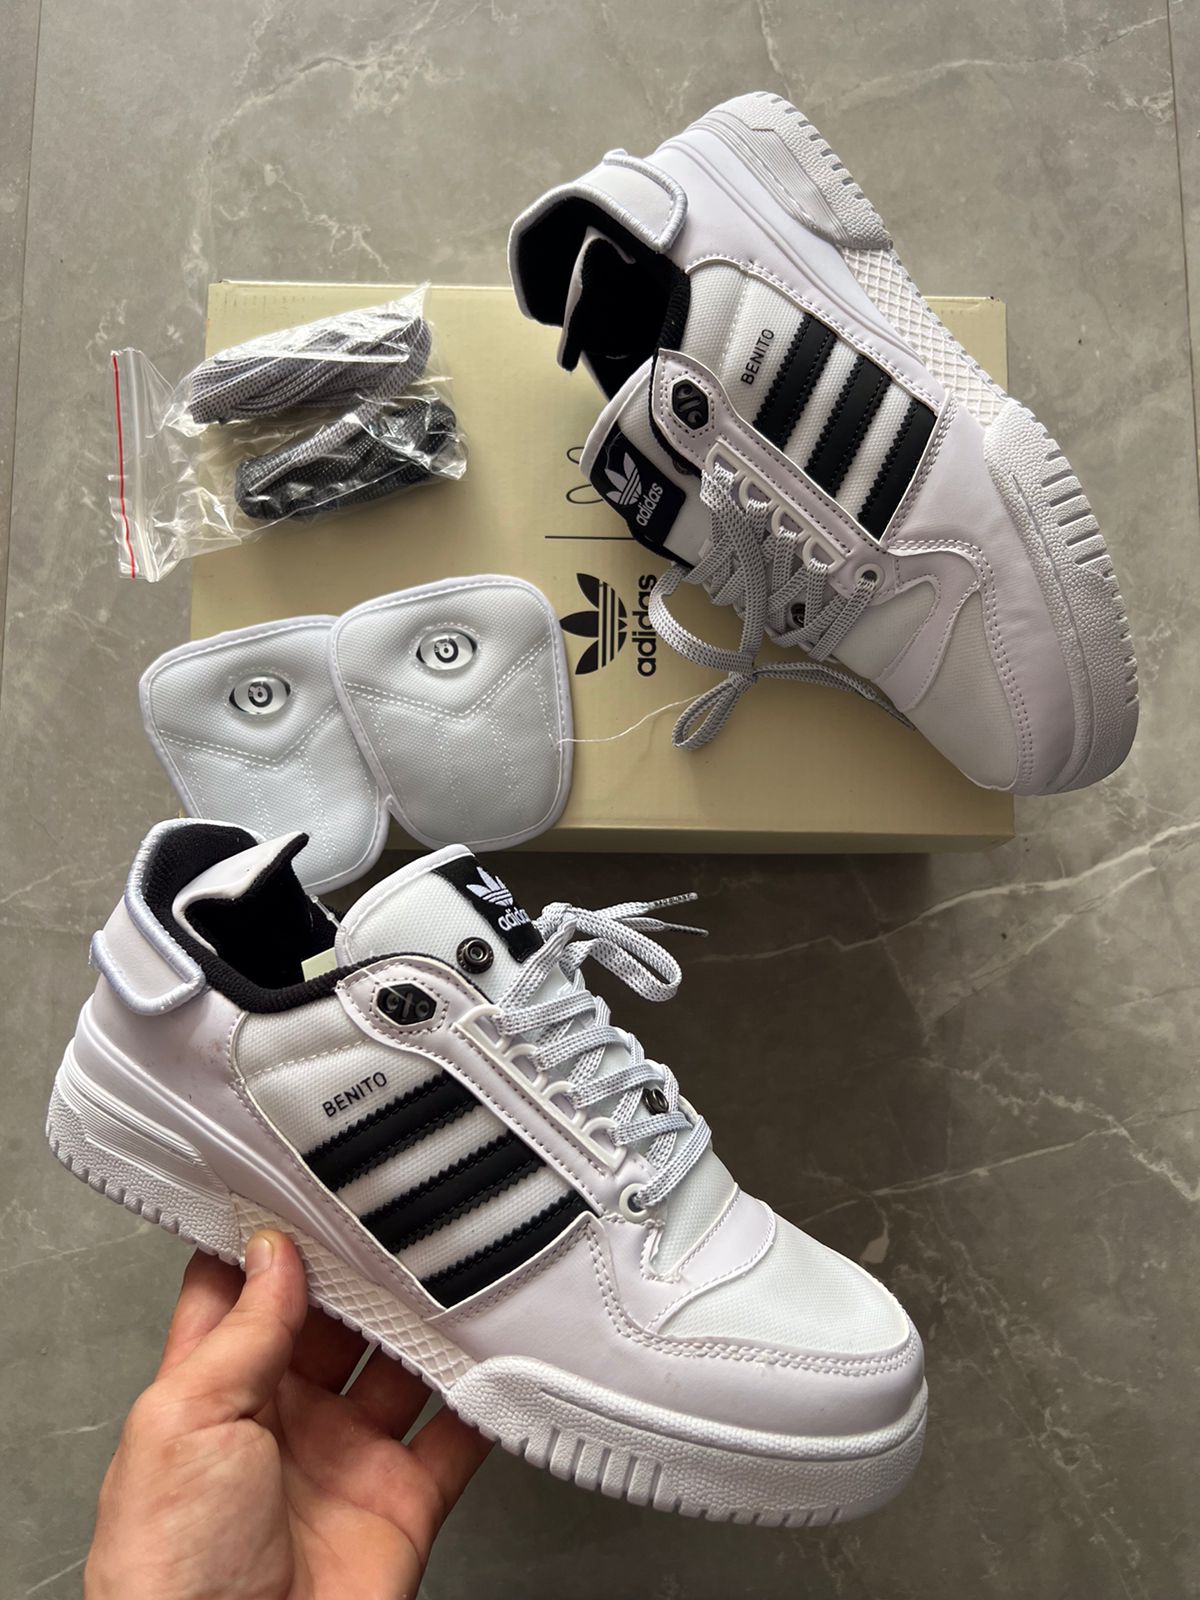 first copy adidas bad bunny shoe - shoeseller.in